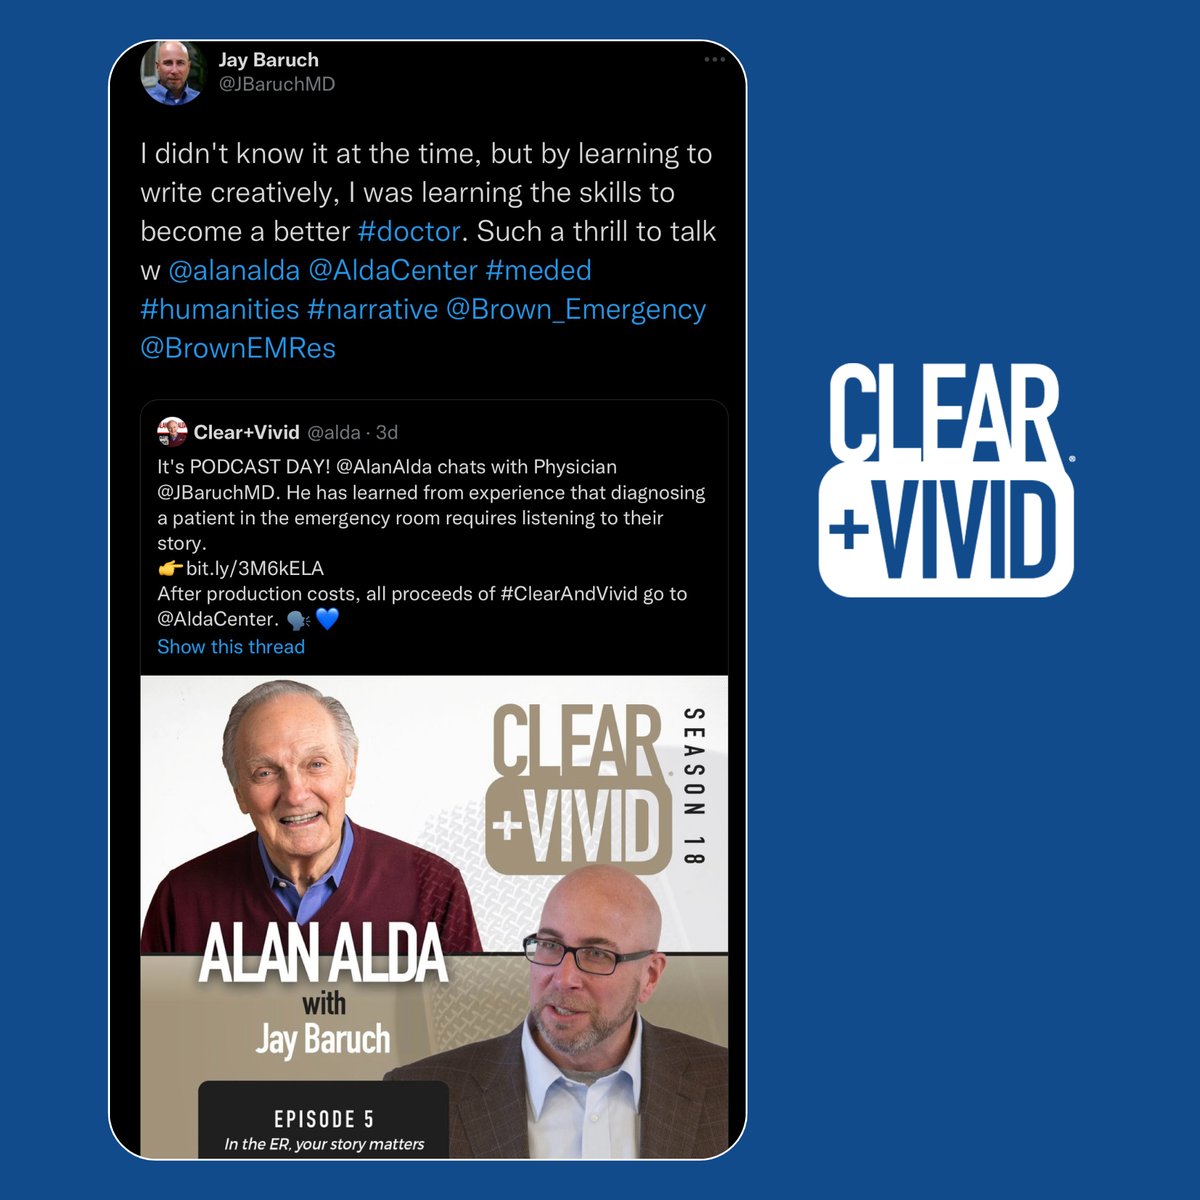 Have you listened to this week's episode of #ClearAndVivid featuring physician @JBaruchMD? Diagnosing a patient in the emergency room requires listening to their story. 👉 bit.ly/3M6kELA After production costs, all proceeds of #ClearAndVivid go to @AldaCenter. 🗣️💙